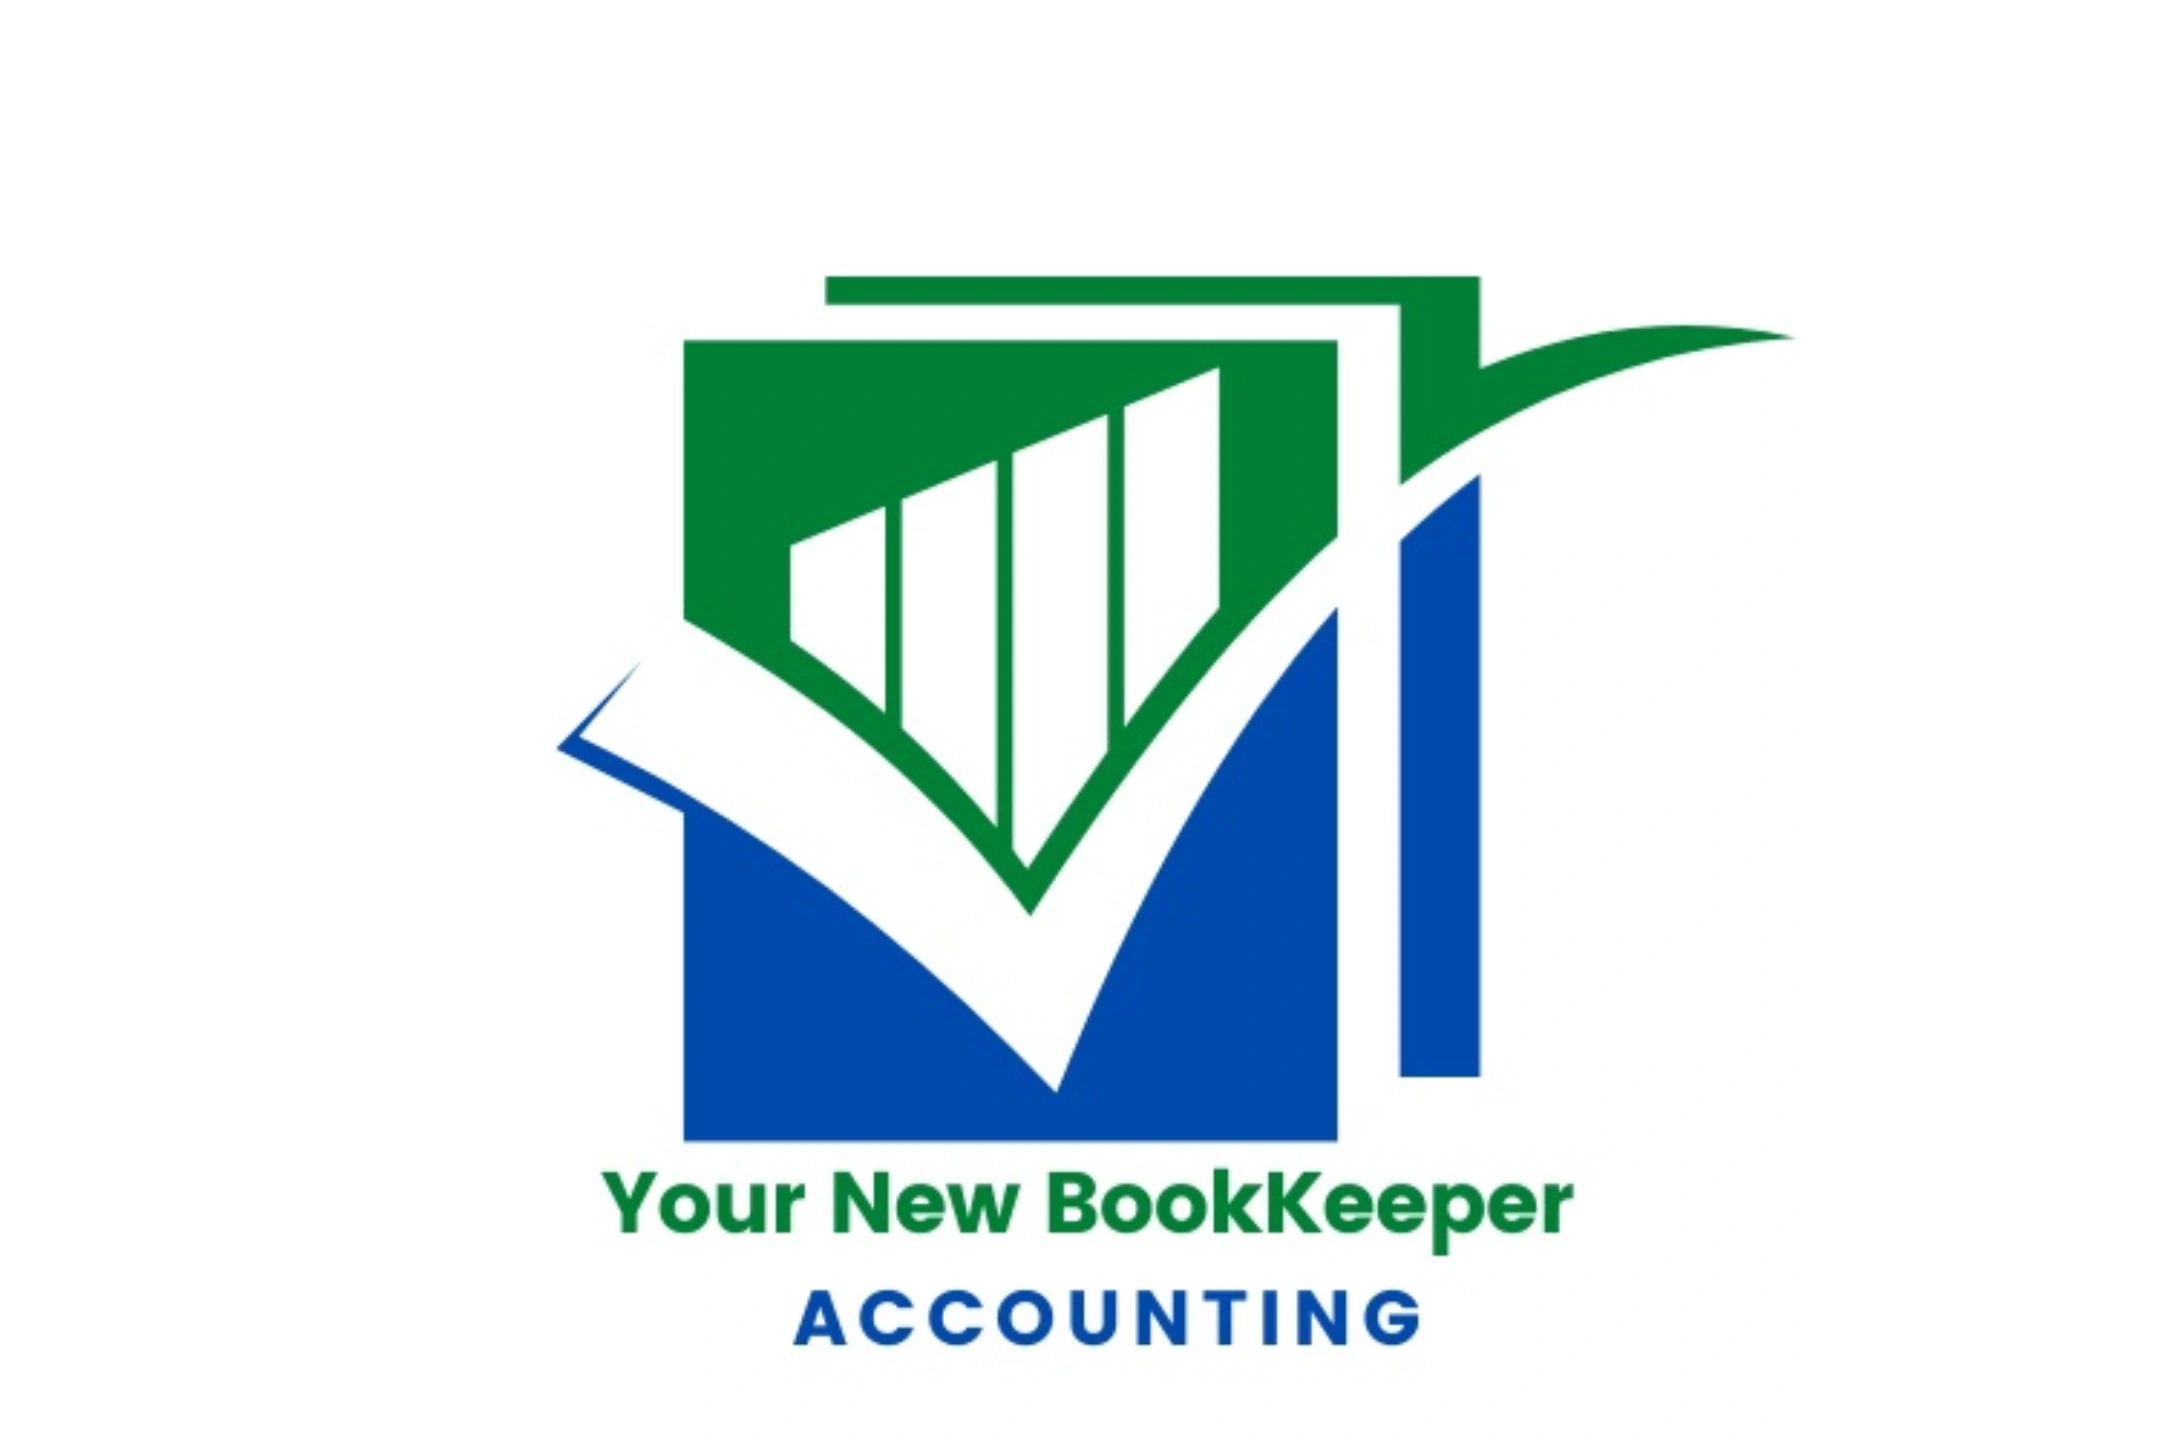 Your New Bookkeeper - Bookkeeping and Accounting